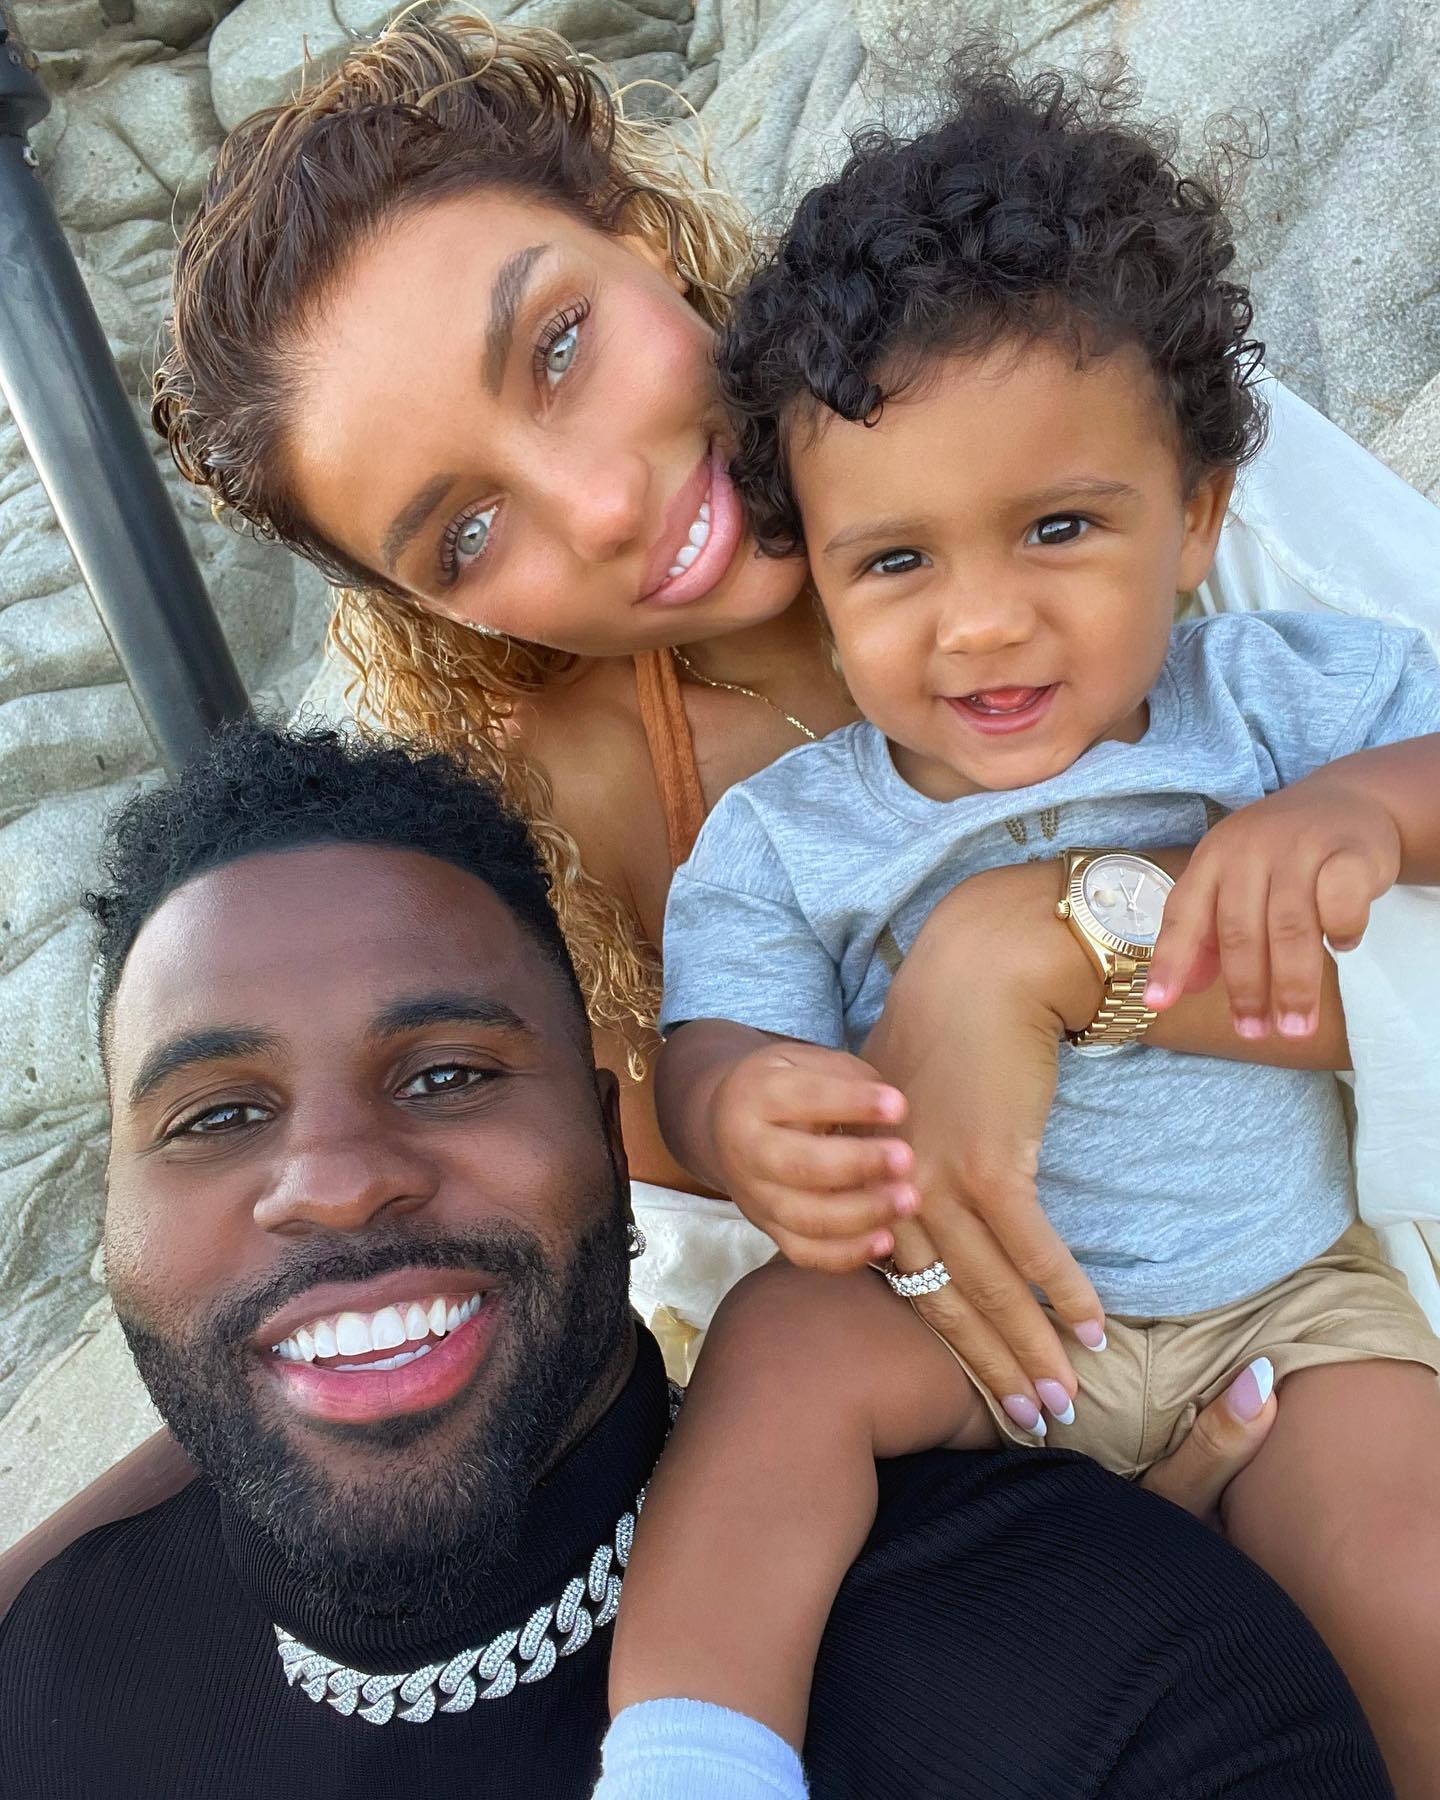 Jason Derulo and Jena Frumes Take Cabo Trip With Son 7 Months After Split